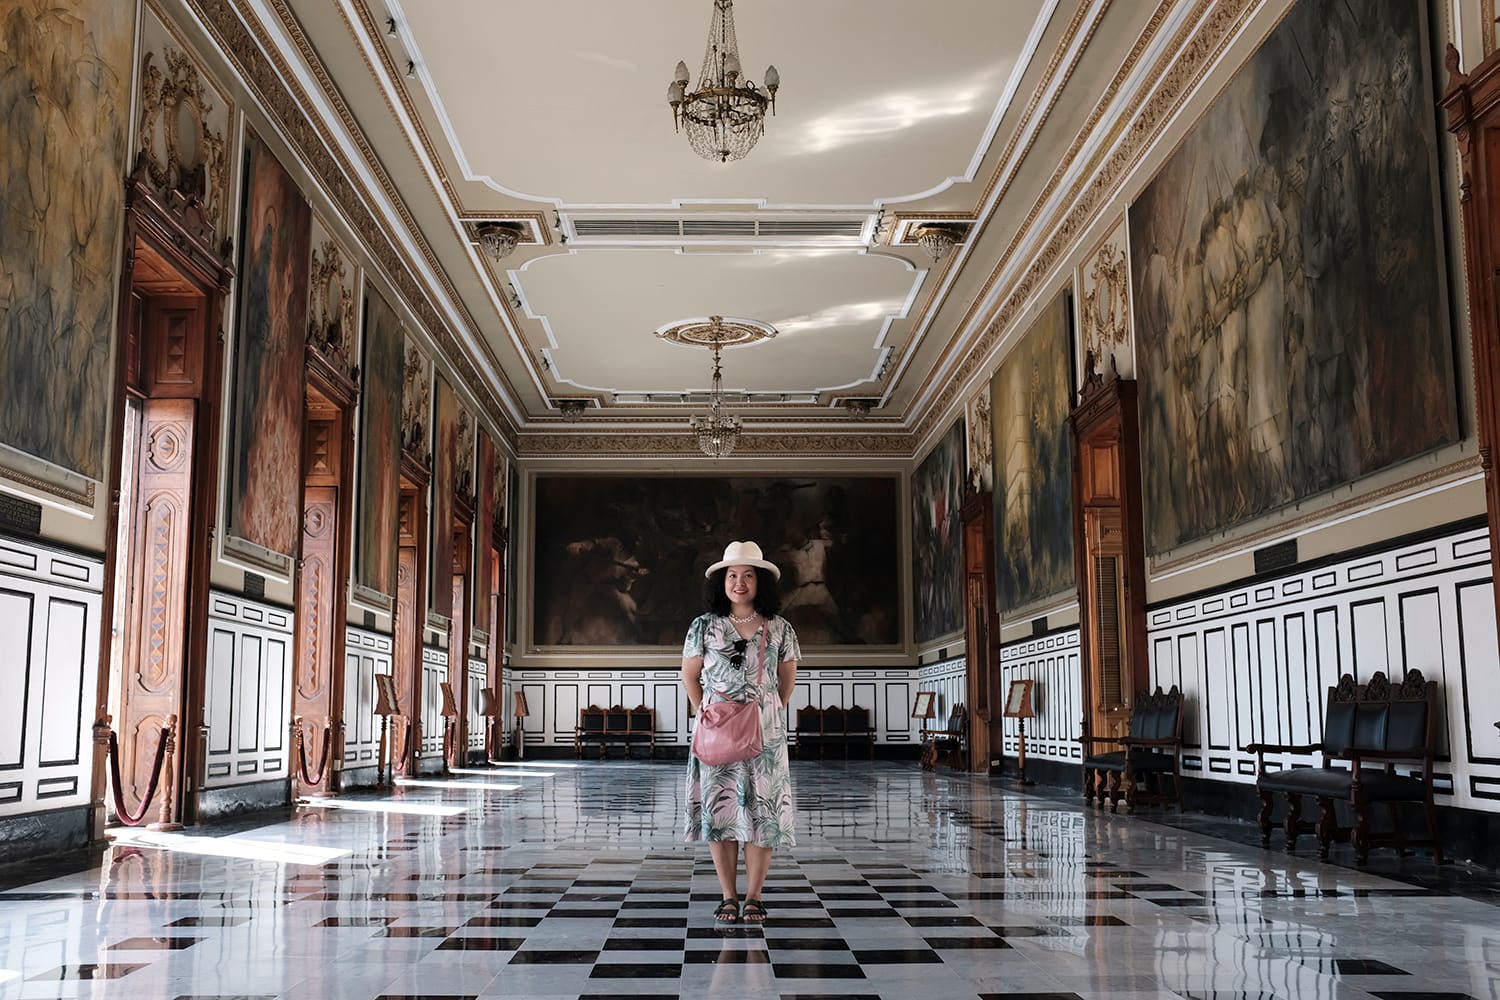 An Asian female tourist is posing for a picture inside the main hall of Government Palace - Palacio del Gobierno in Main Square, Merida, Yucatan, Mexico.